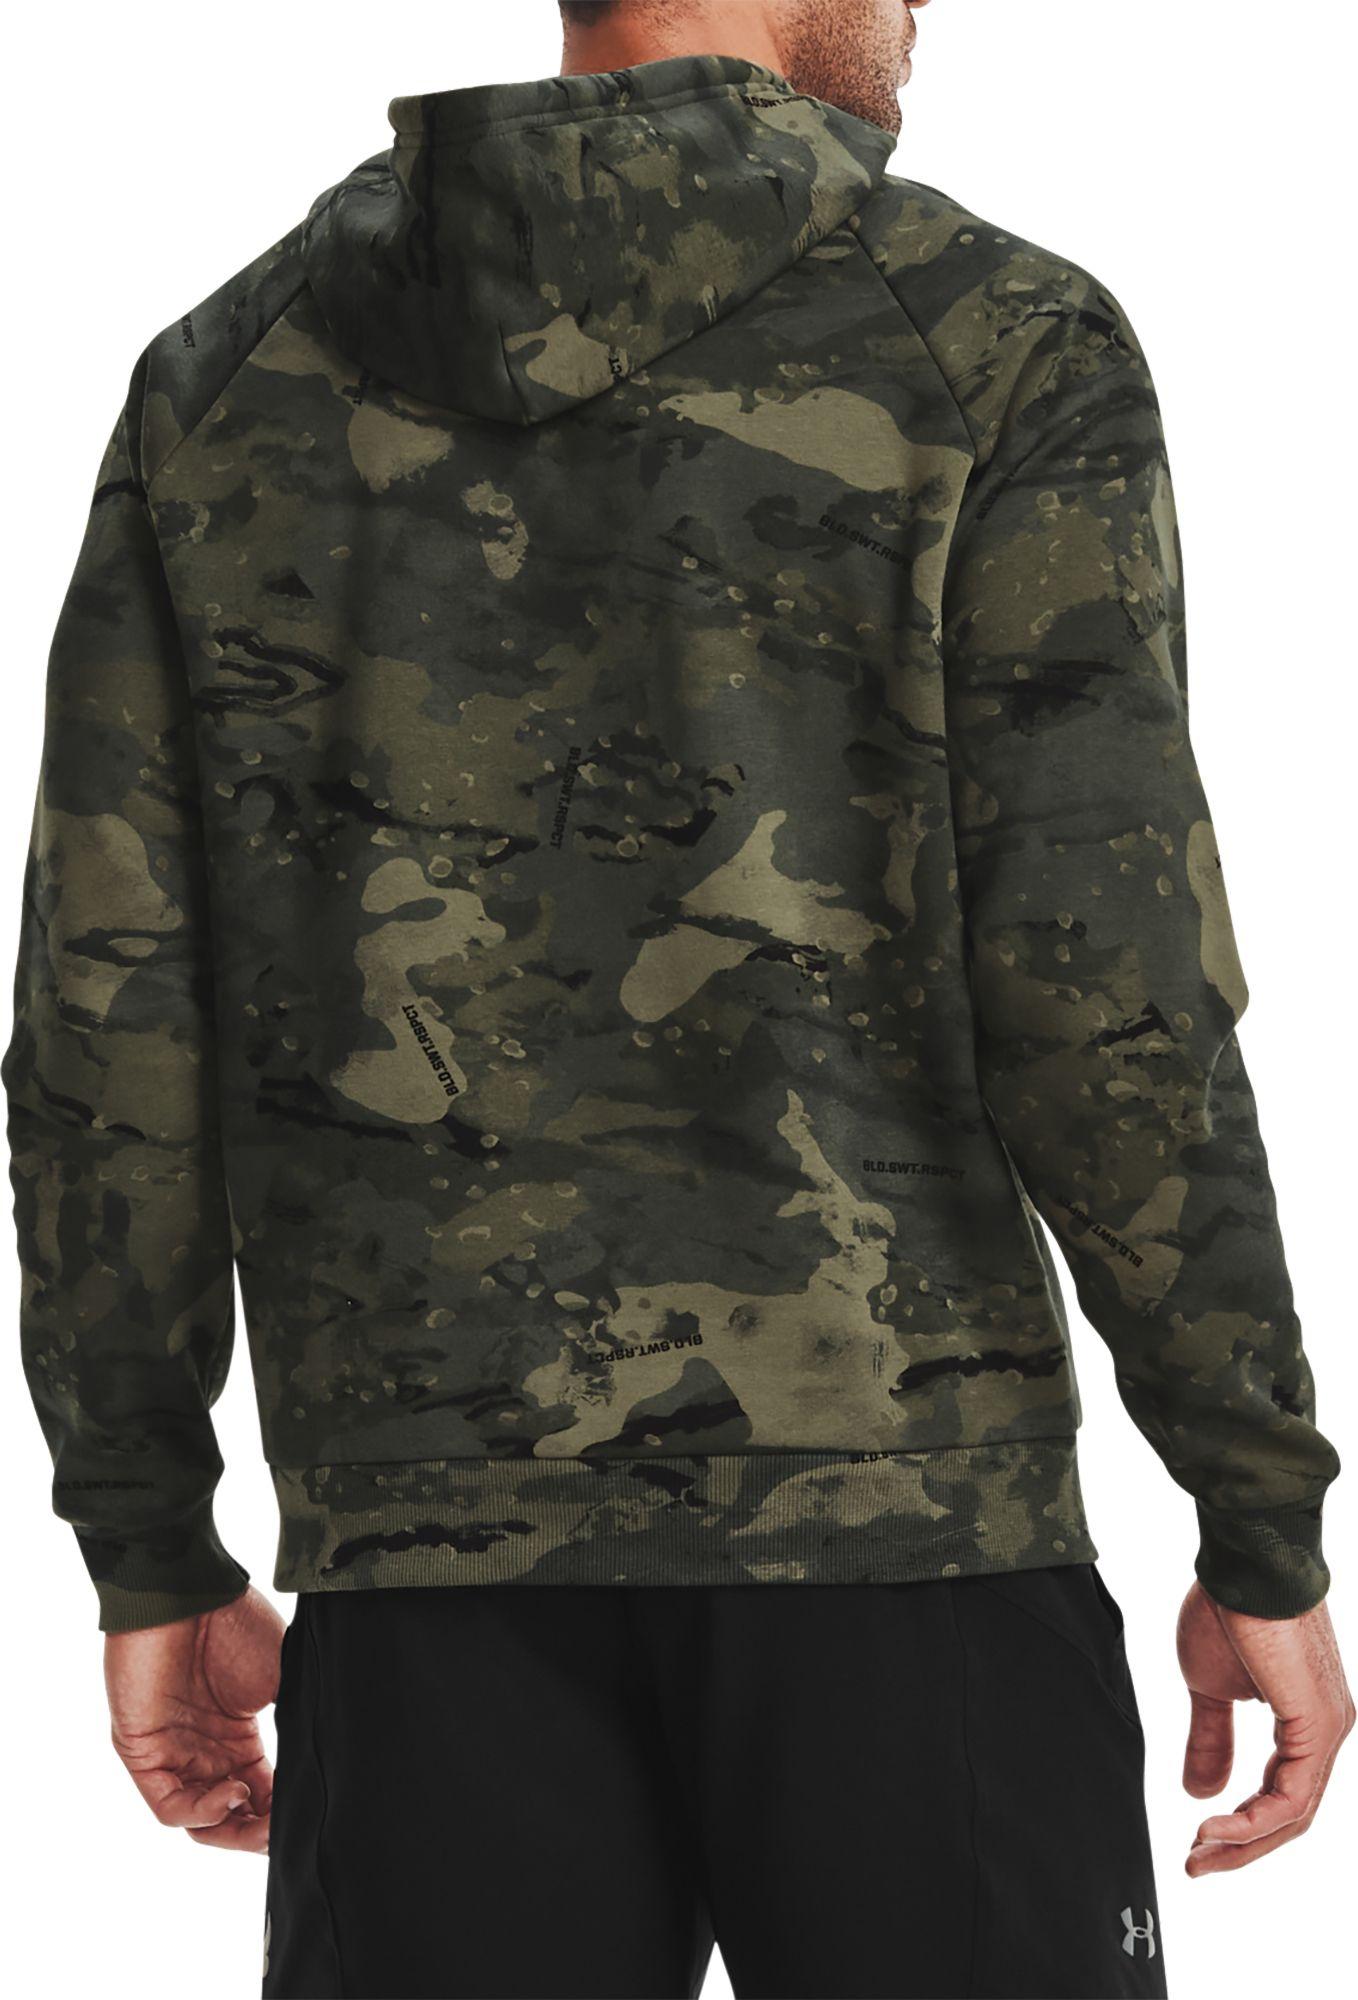 Under Armour Project Rock Veteran's Day Men's Camo Pullover Hoodie Size ...